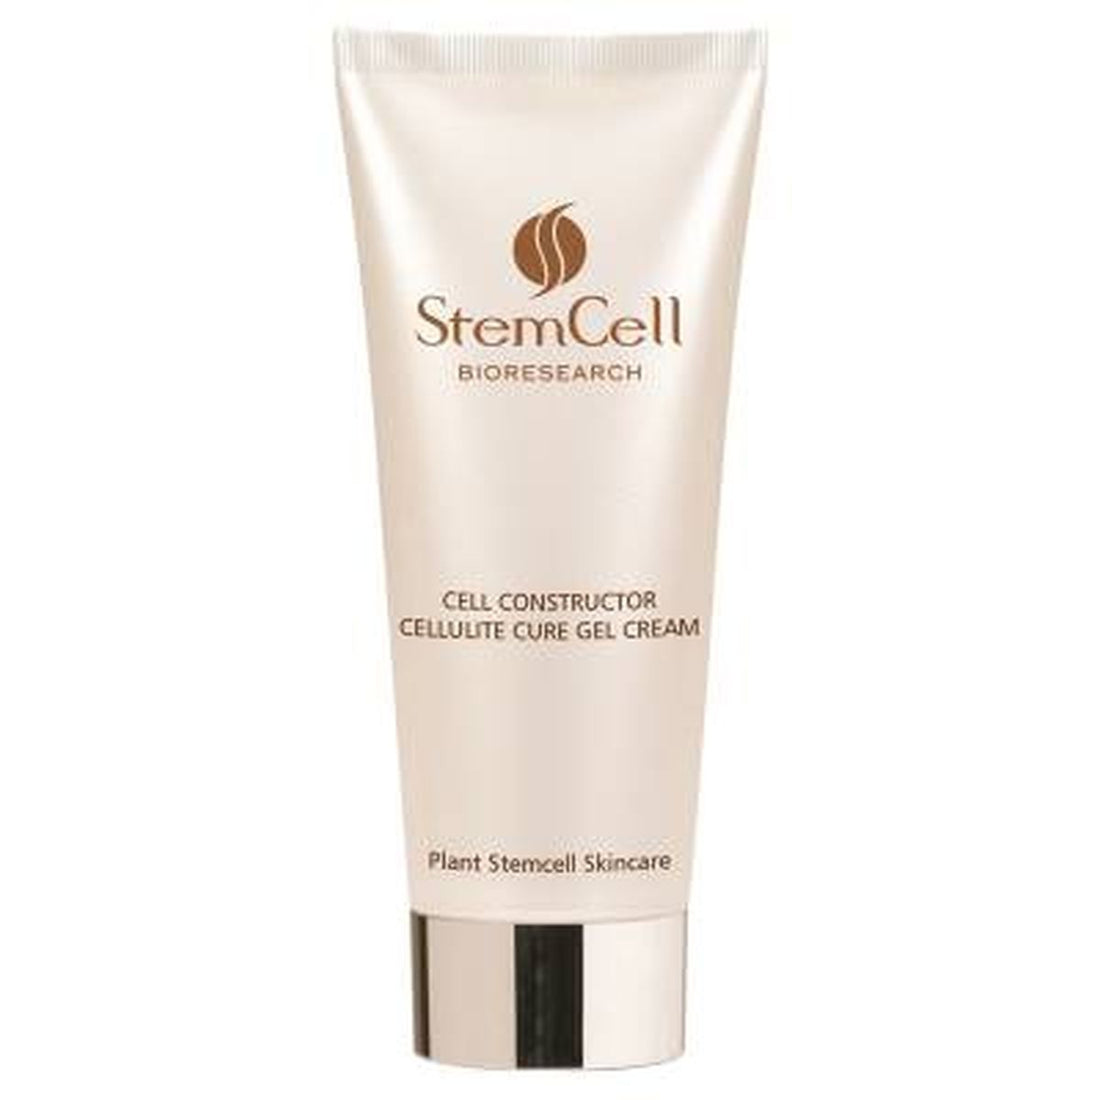 Stemcell Cell Constructor Anti-Cellulite-Heilgel-Creme 200 ml